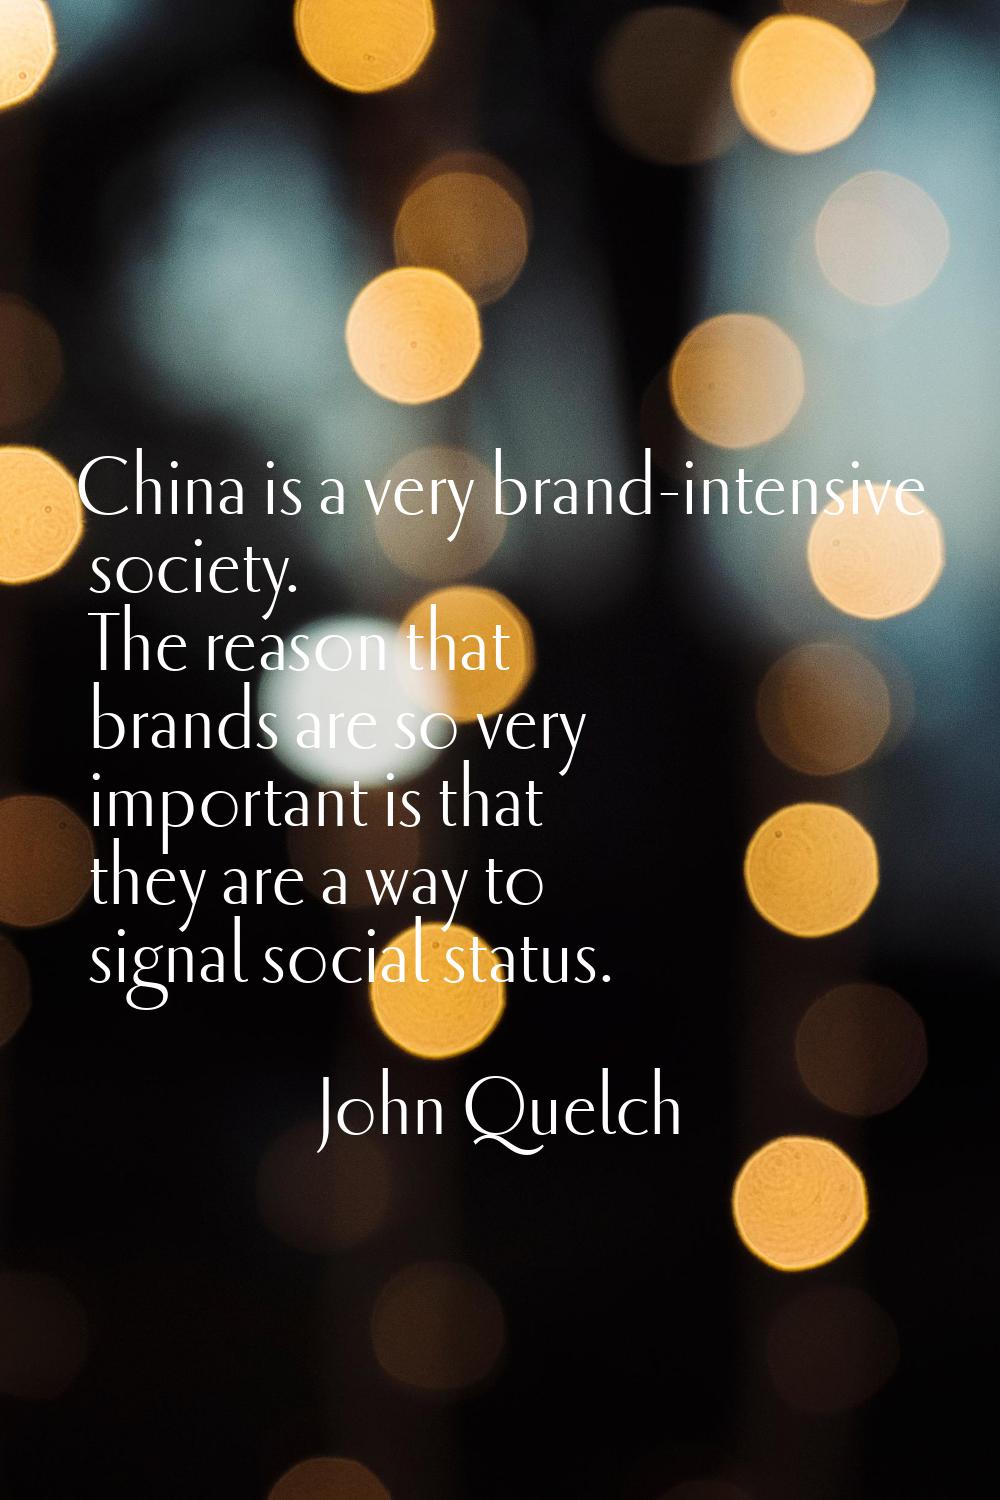 China is a very brand-intensive society. The reason that brands are so very important is that they 